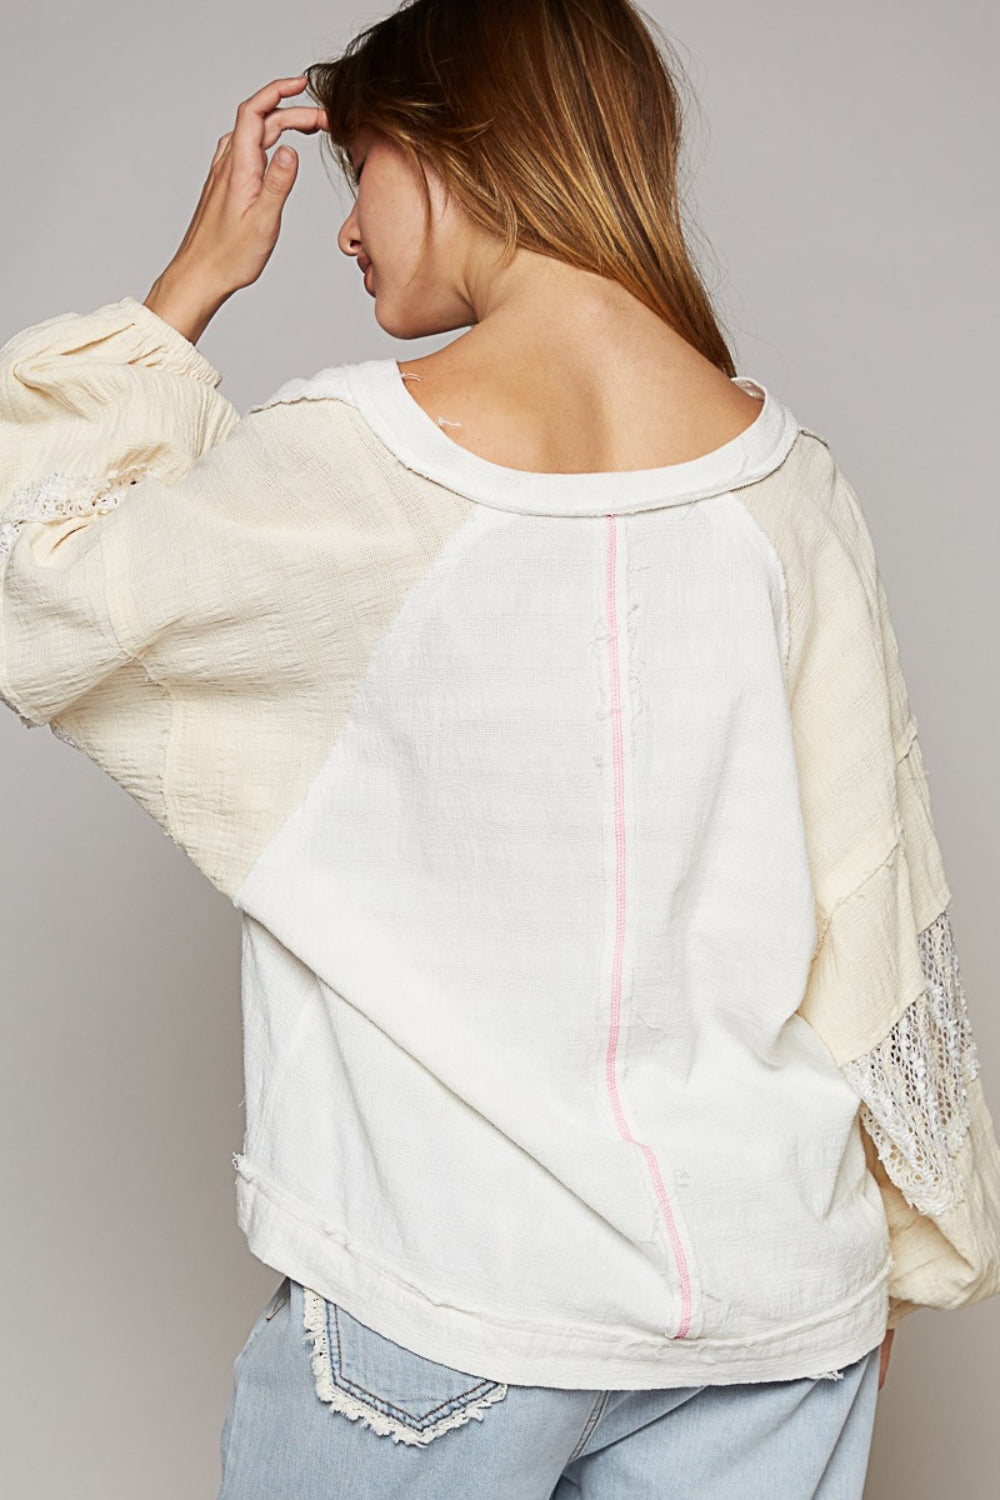 This Balloon Long Raglan Sleeve Crochet Patch Top is a trendy and stylish piece for your wardrobe. The balloon sleeves and raglan design give it a unique and modern look. The crochet patch detail adds a touch of charm and texture to the top. S - L